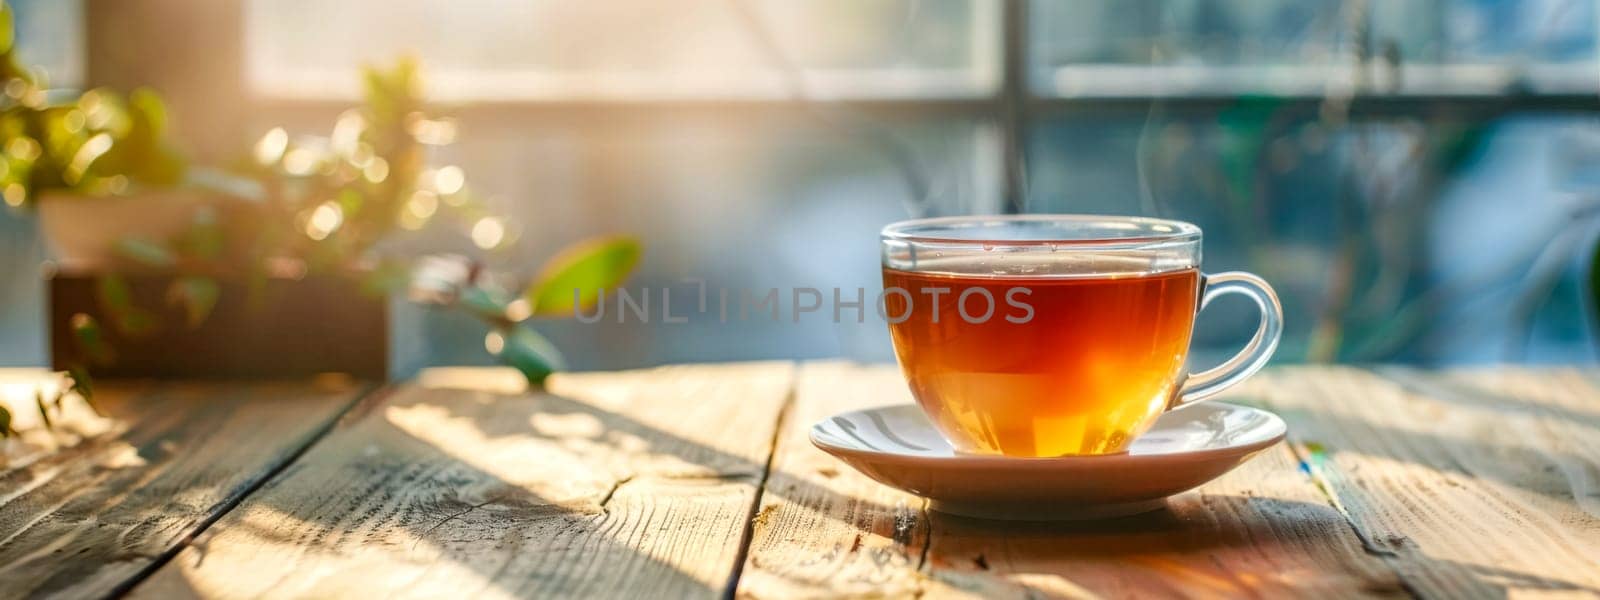 A cup of tea on a rustic wooden table bathed in warm sunlight by Edophoto